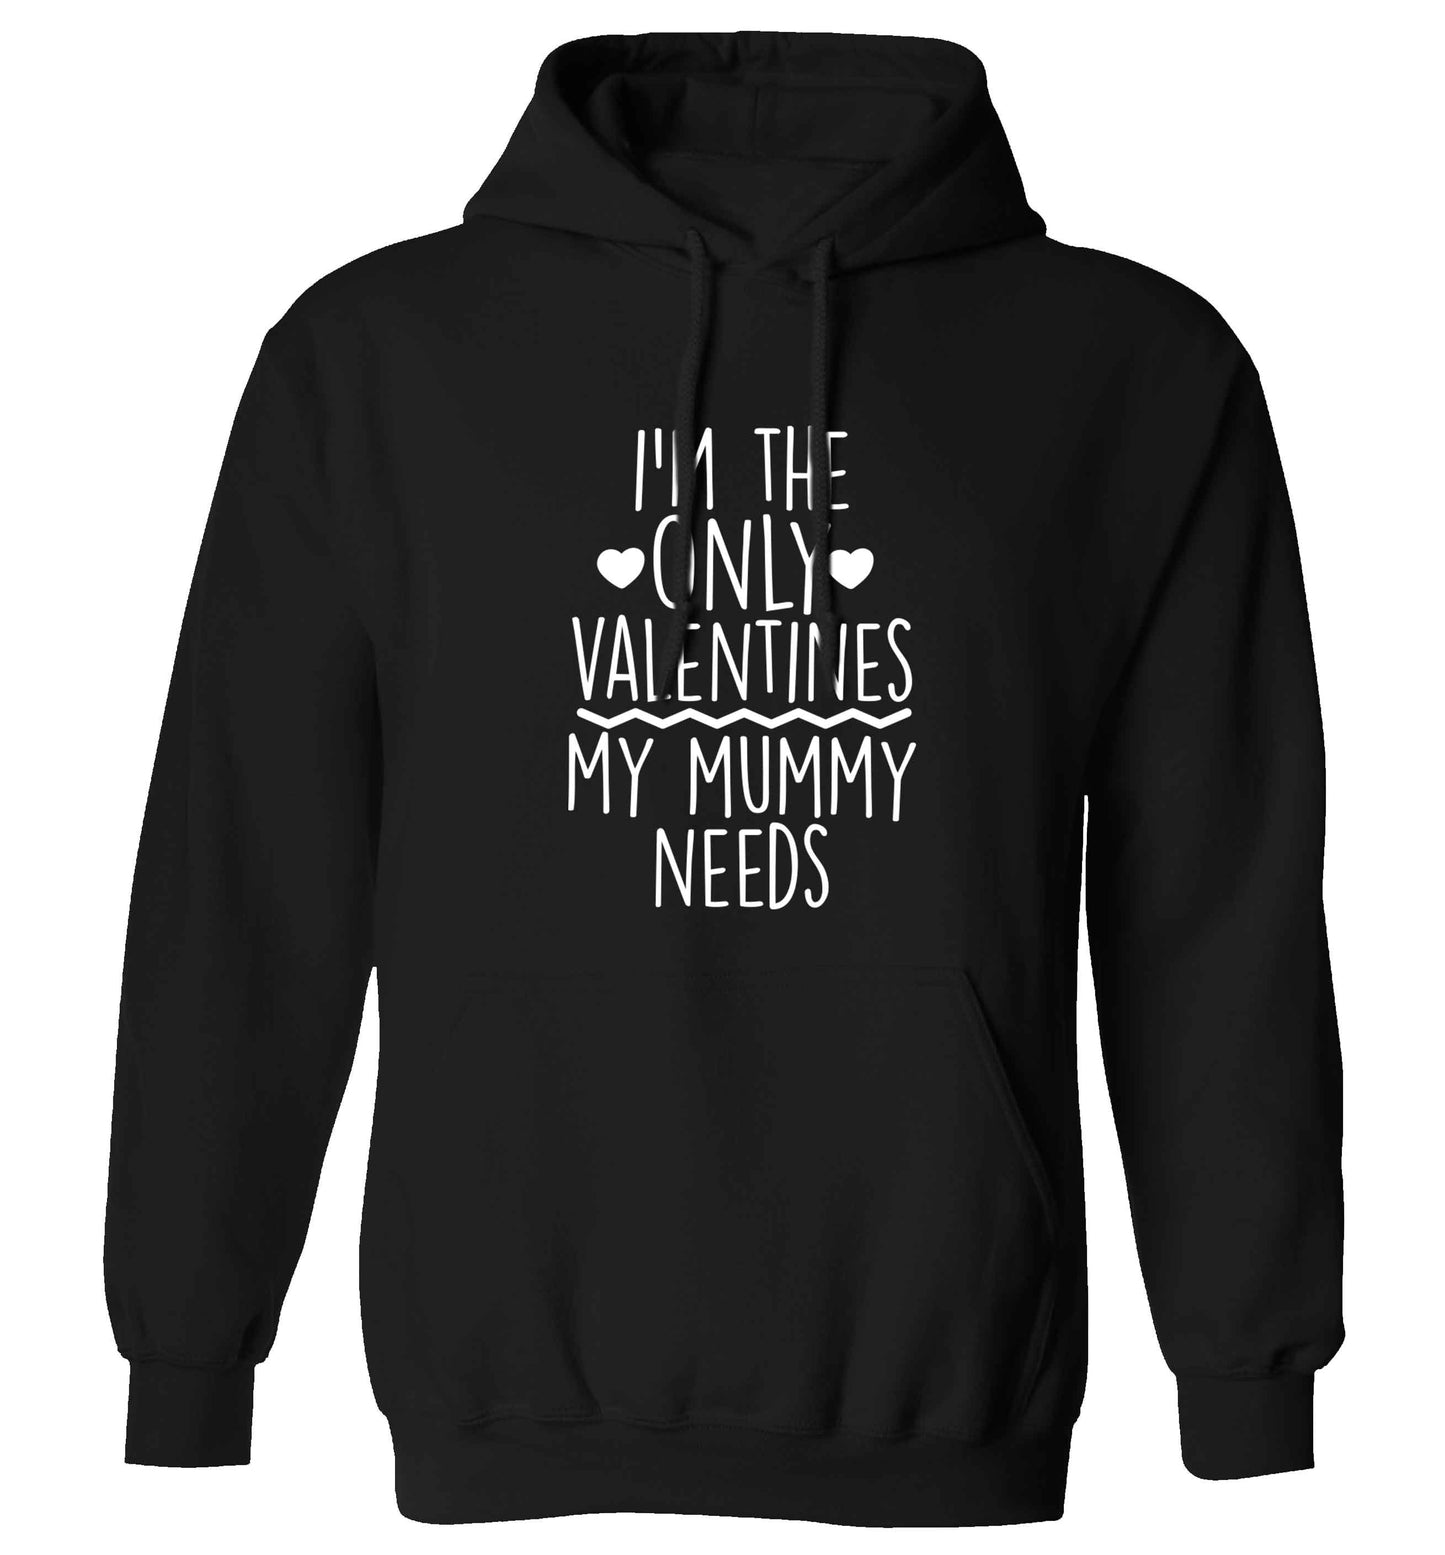 I'm the only valentines my mummy needs adults unisex black hoodie 2XL